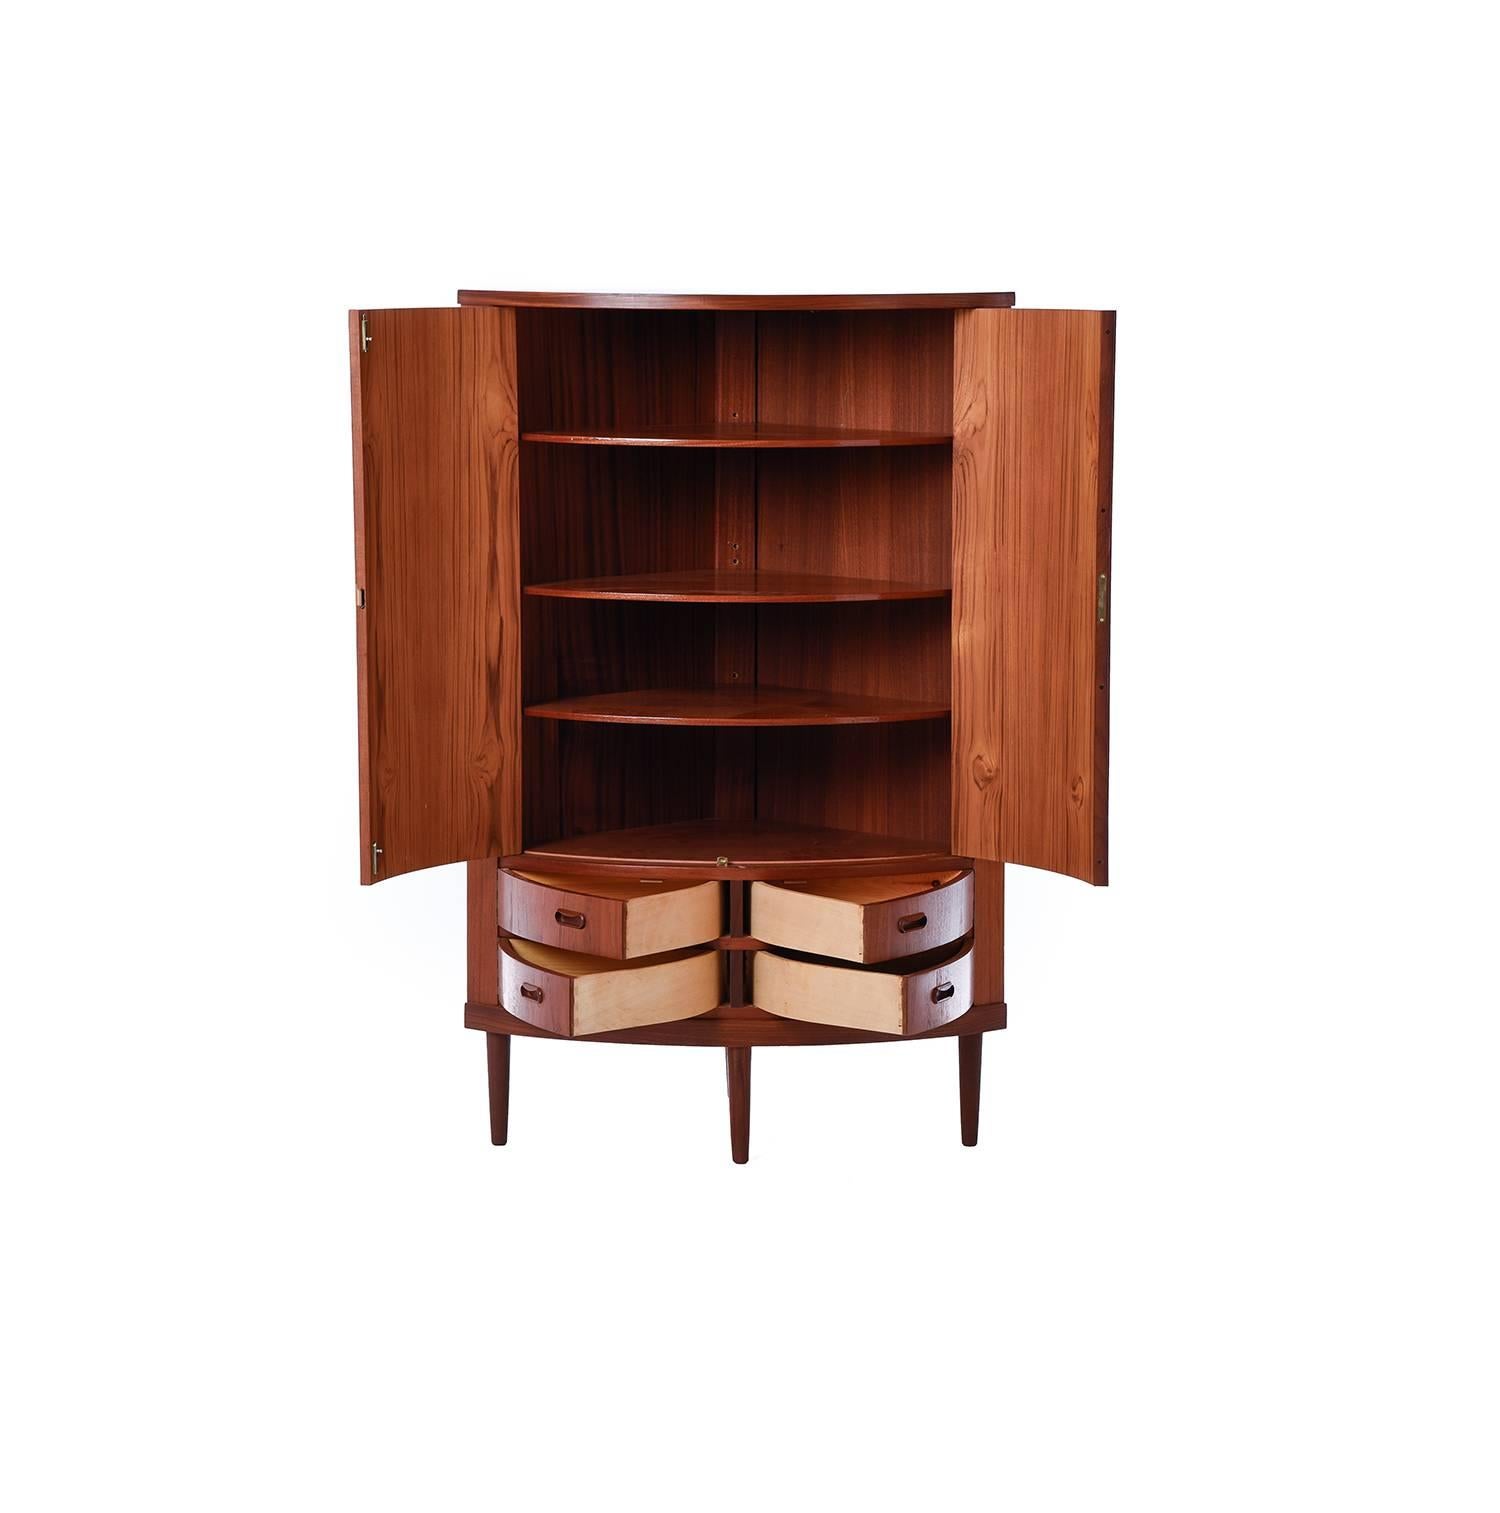 This unique bow front corner cabinet in teak provides extensive storage options with multiple swing-open drawers and adjustable interior shelves.